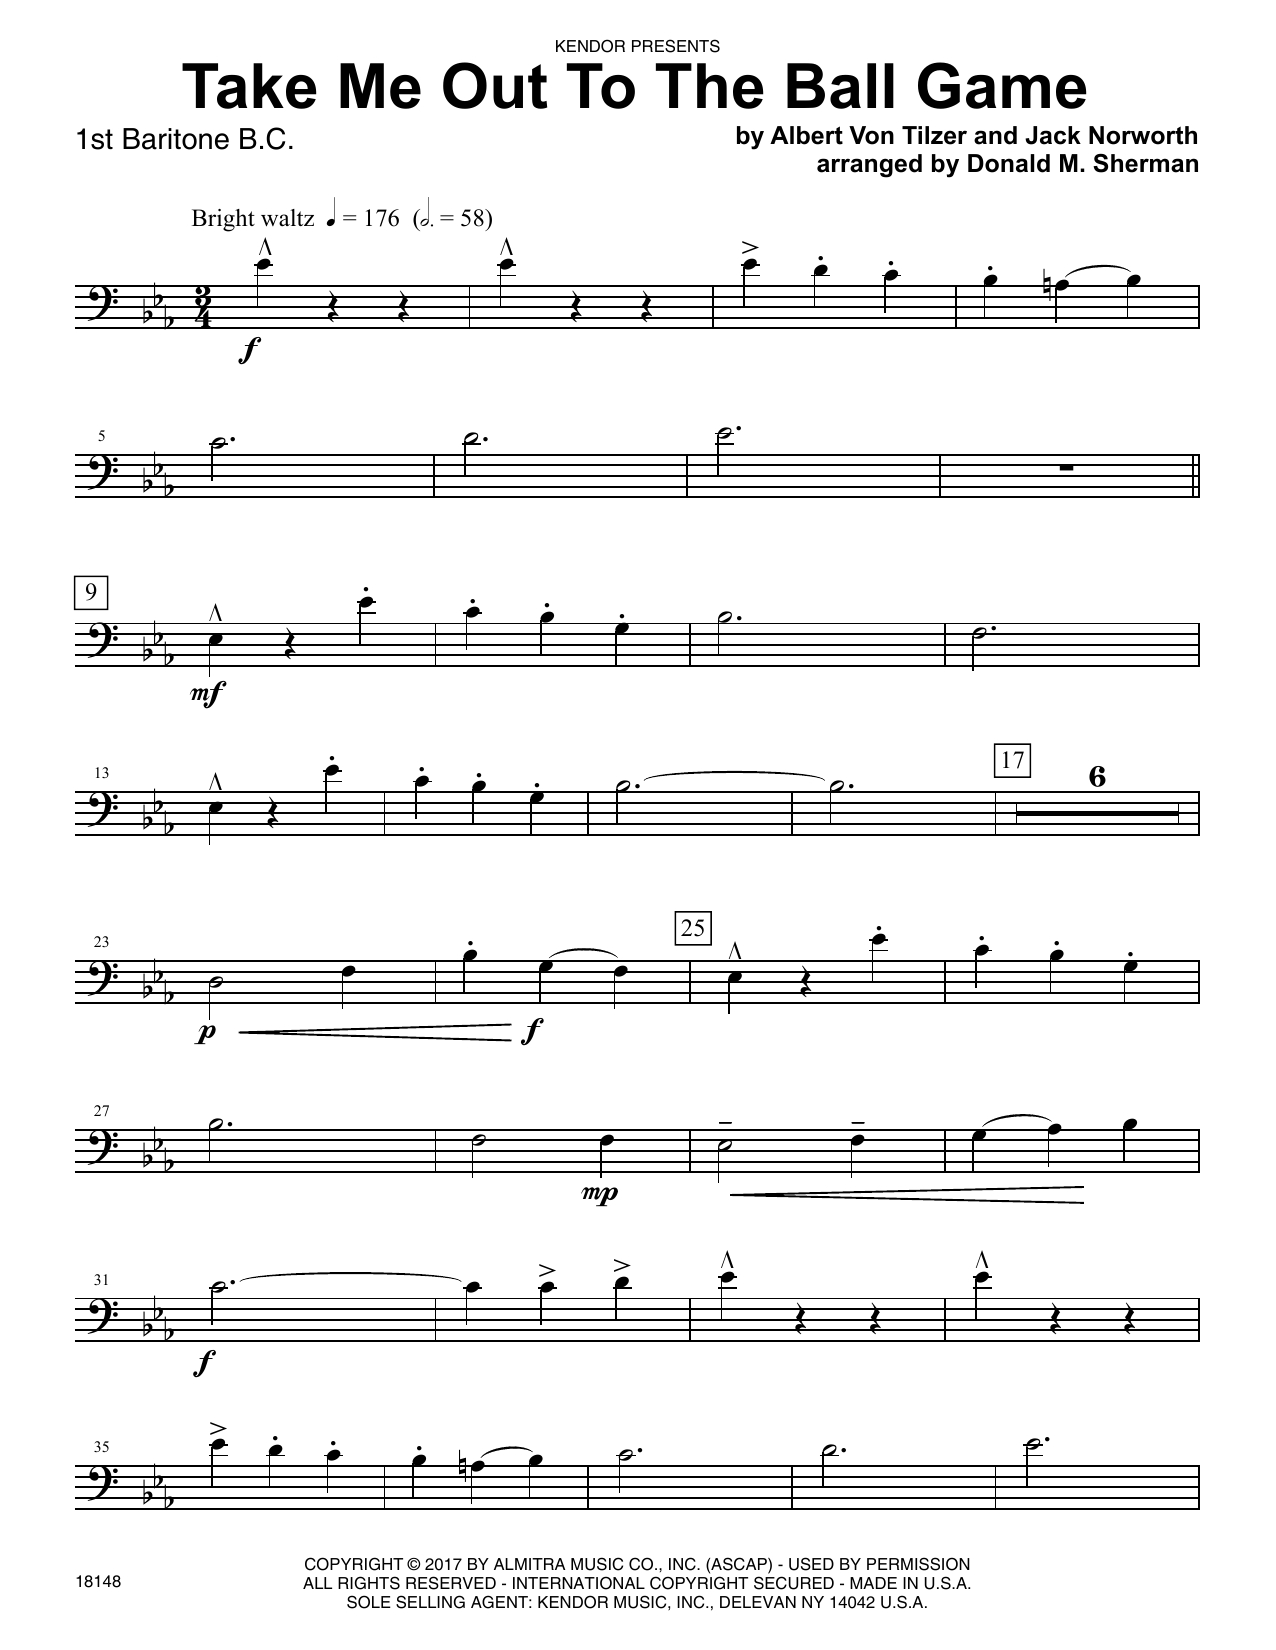 Donald M. Sherman Take Me Out To The Ball Game - 1st Baritone B.C. sheet music notes and chords. Download Printable PDF.